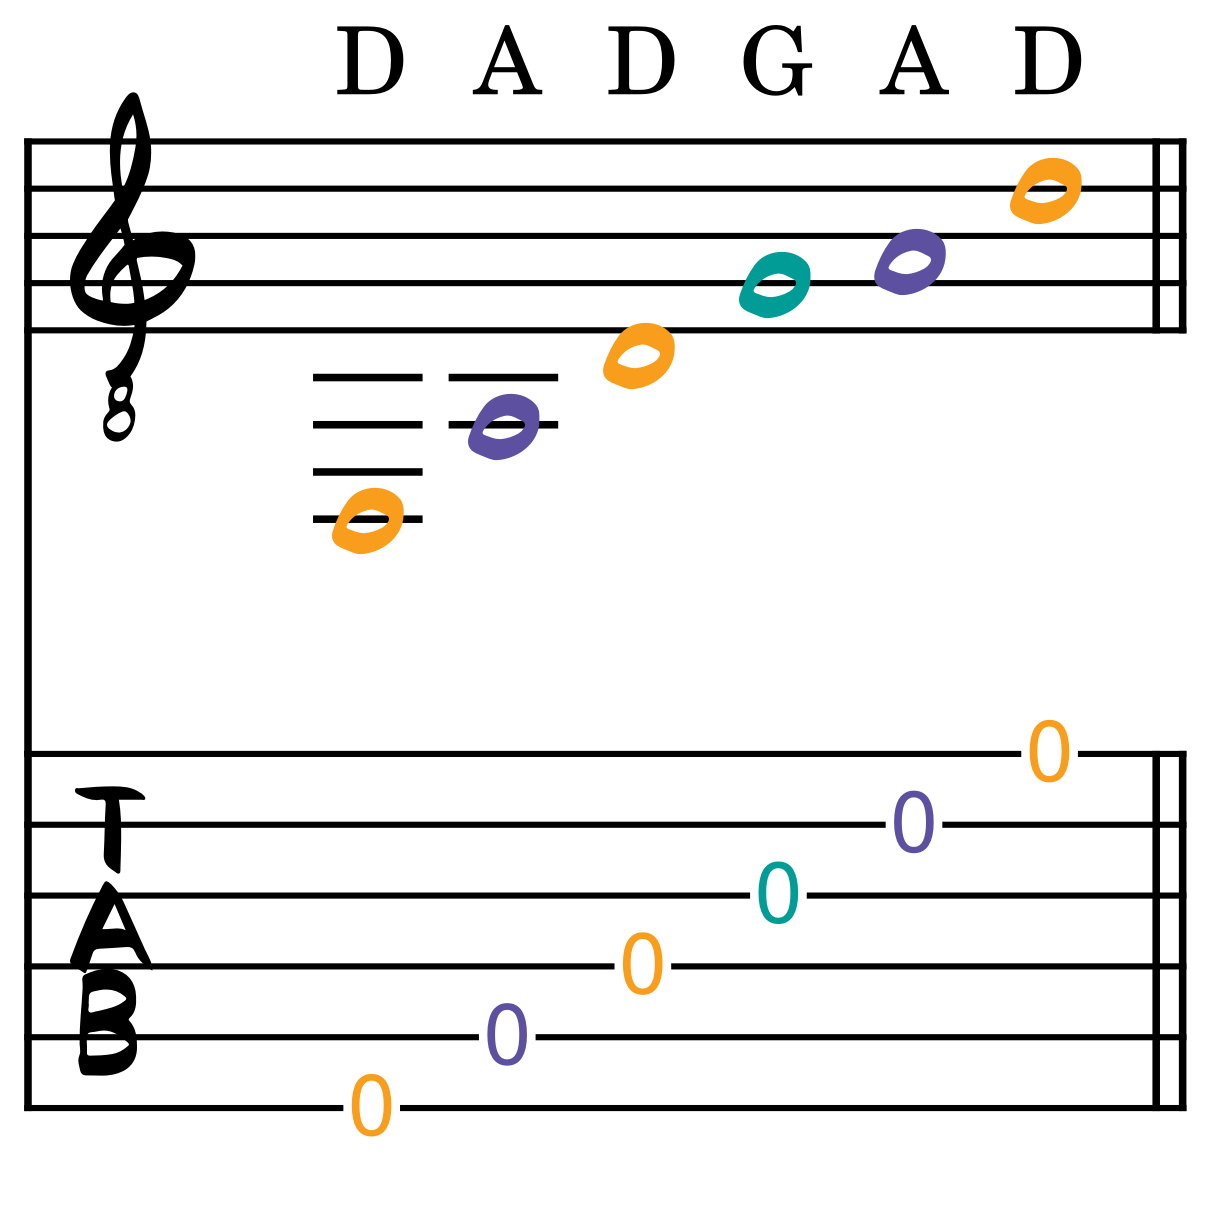 Here is how to use DADGAD tuning to create beautiful fingerstyle guitar music.